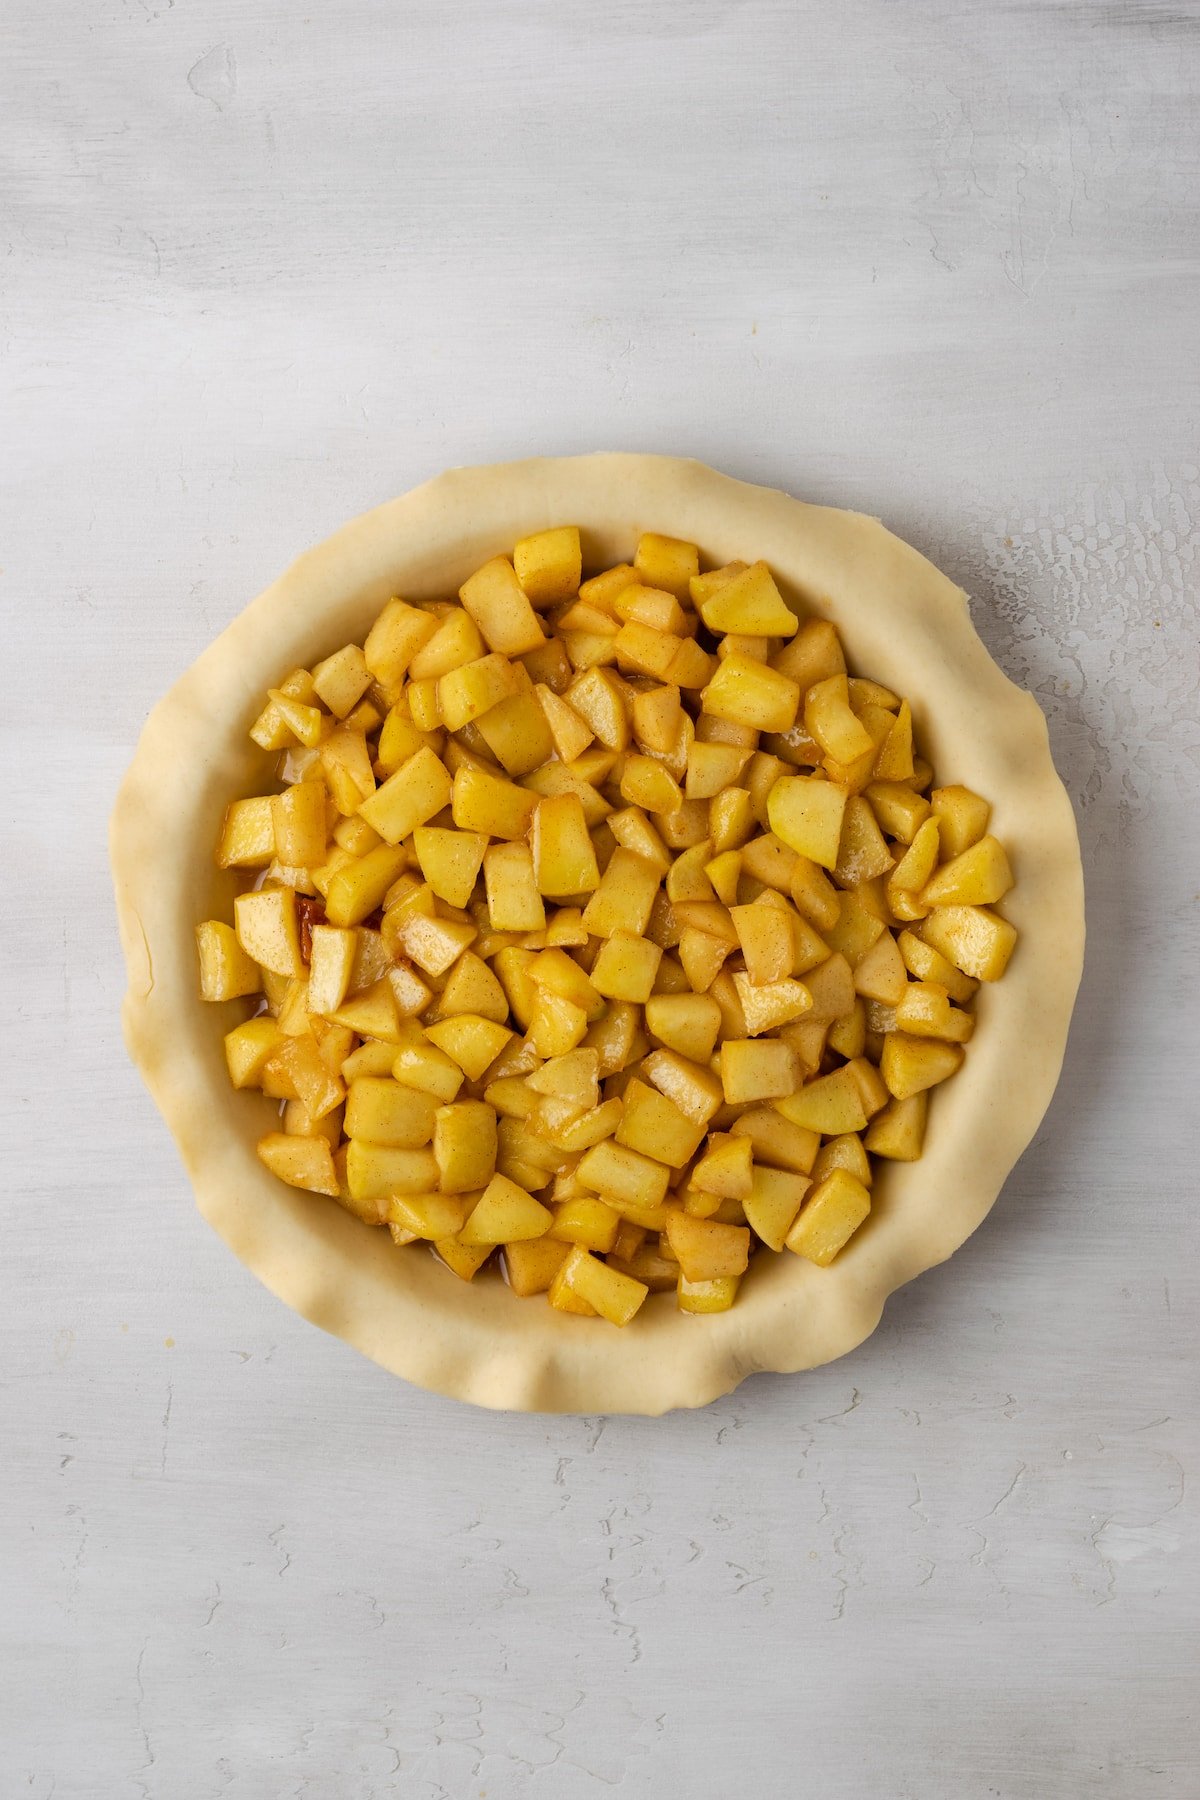 A flaky pie crust filled with apple pie filling.